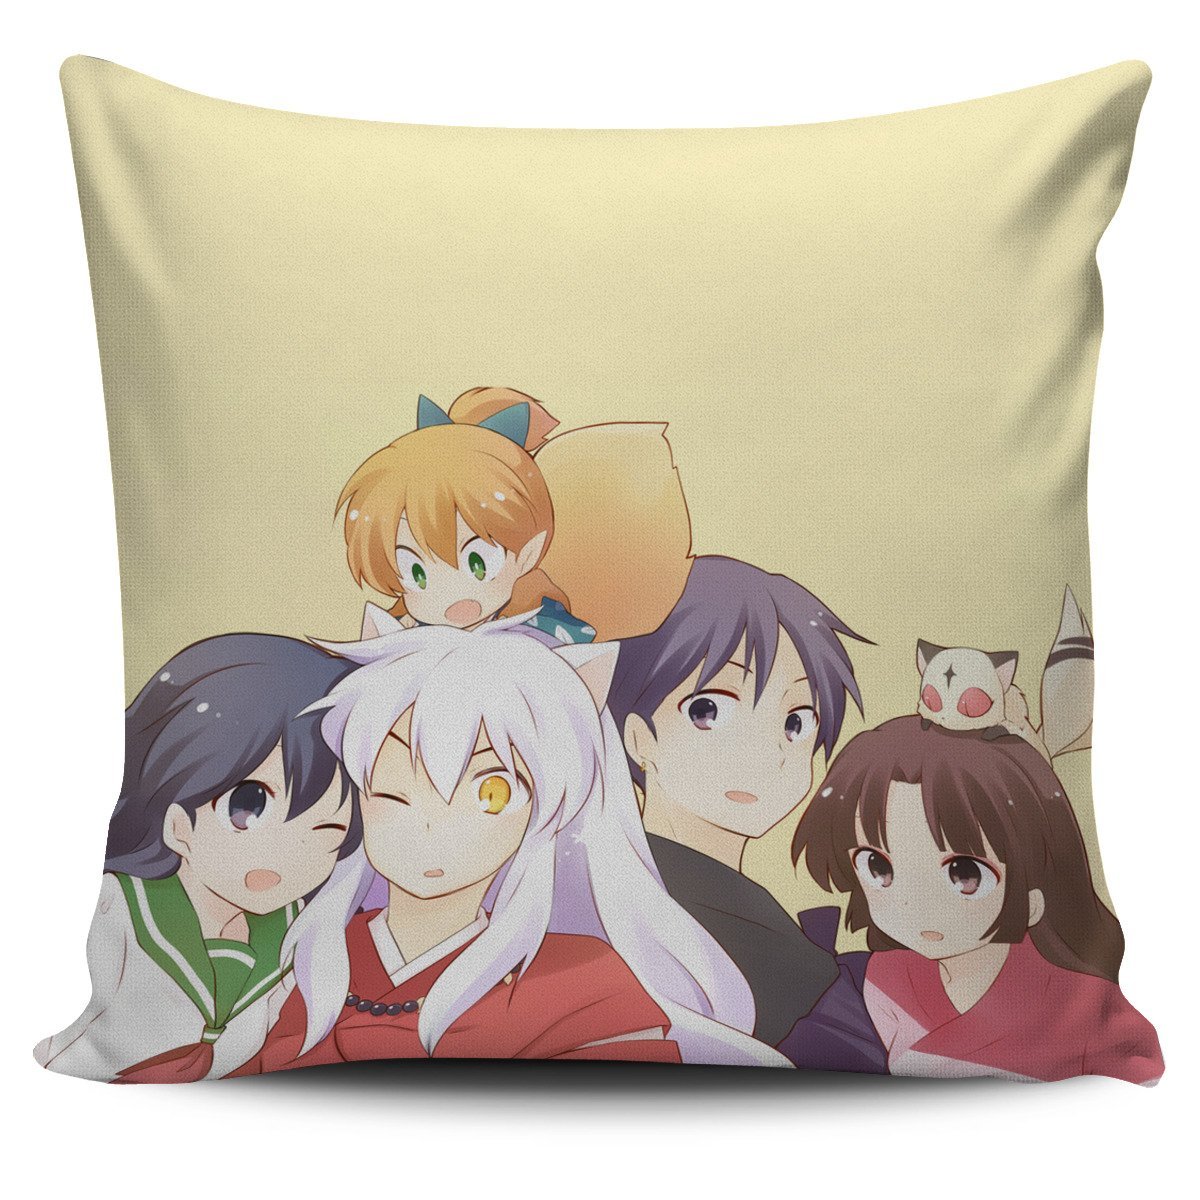 Inuyasha Characters Pillow Cover